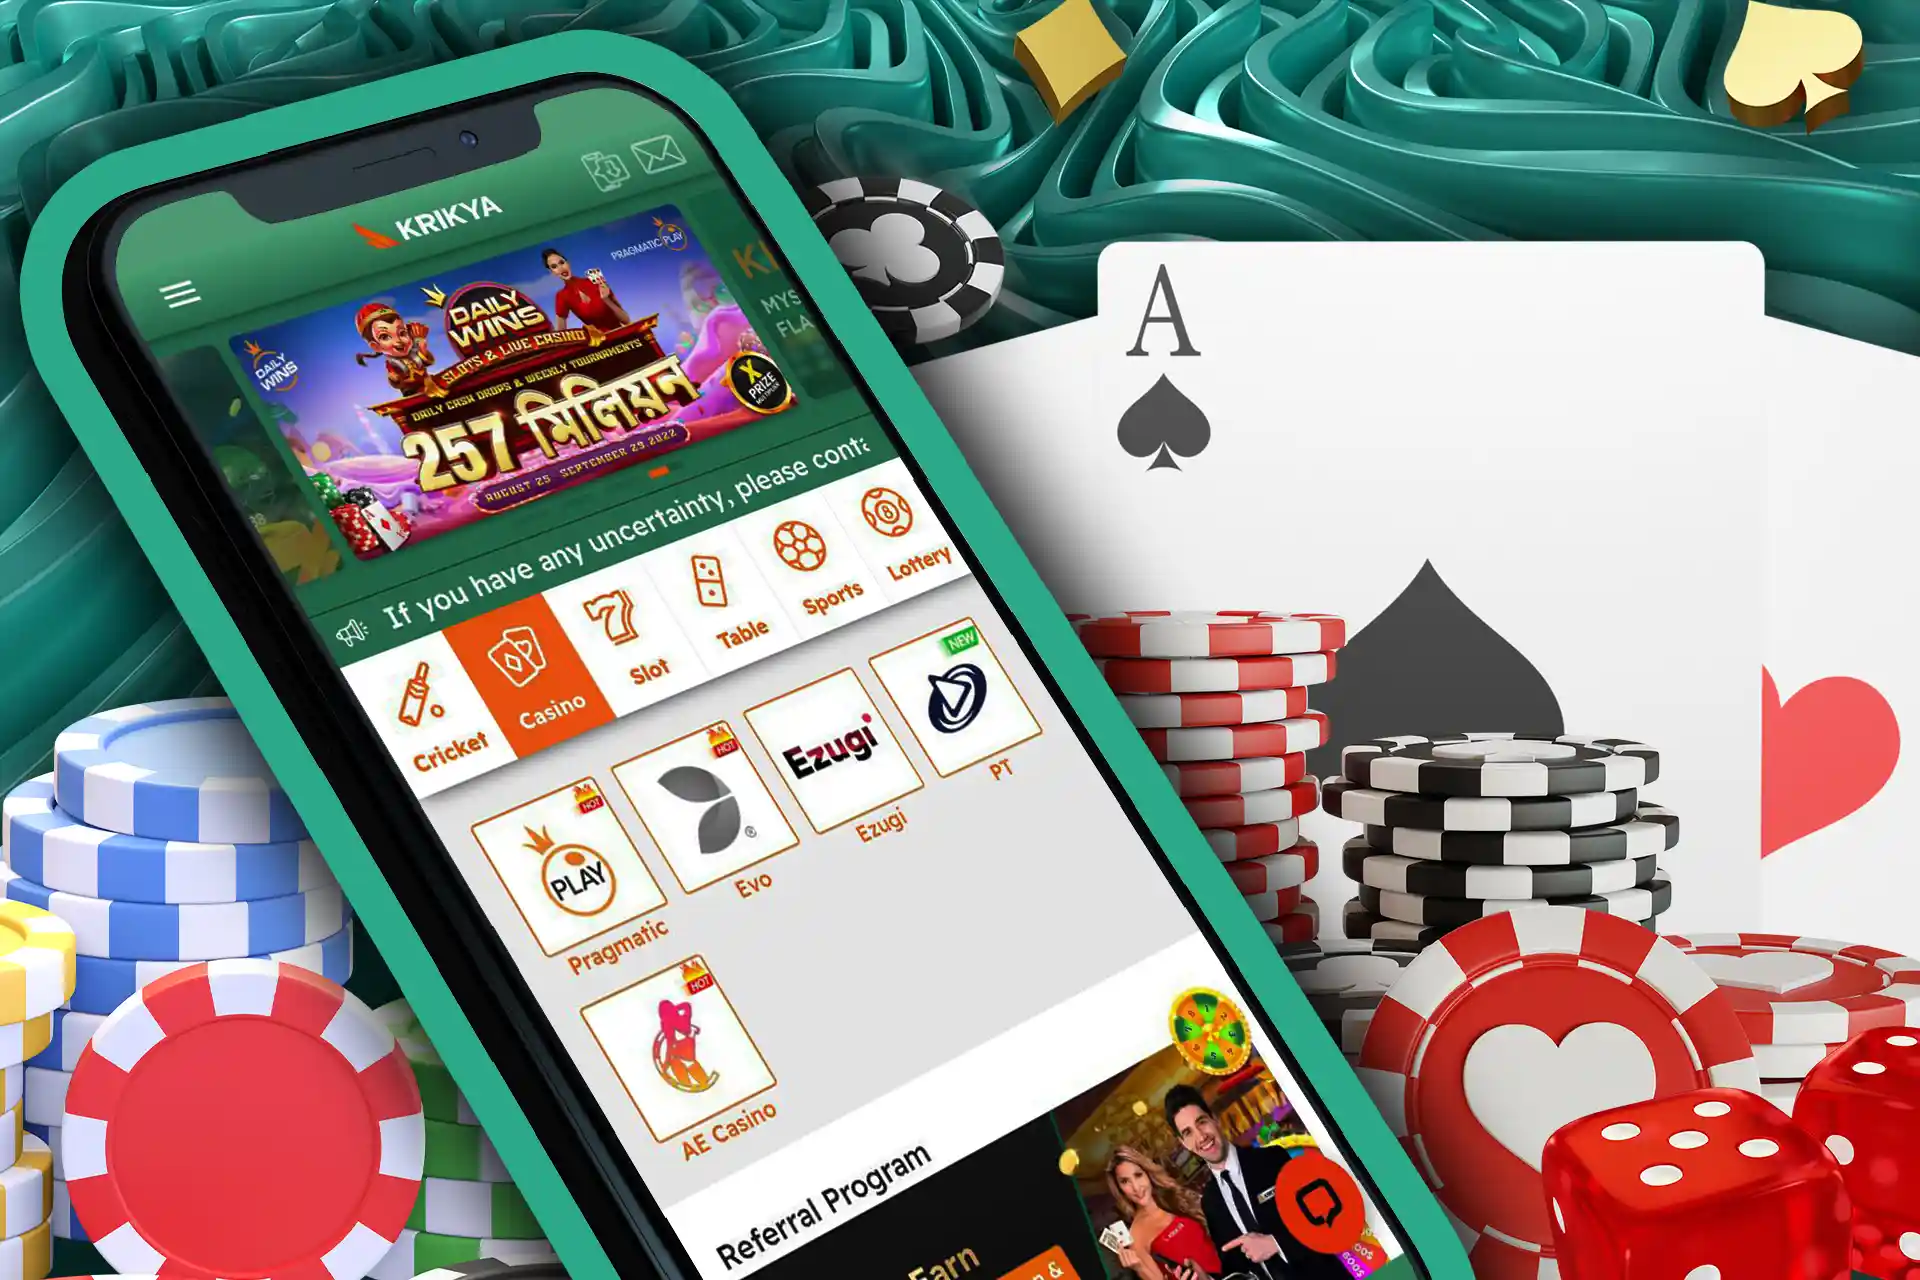 You can also play casino games in the Krikya mobile app.